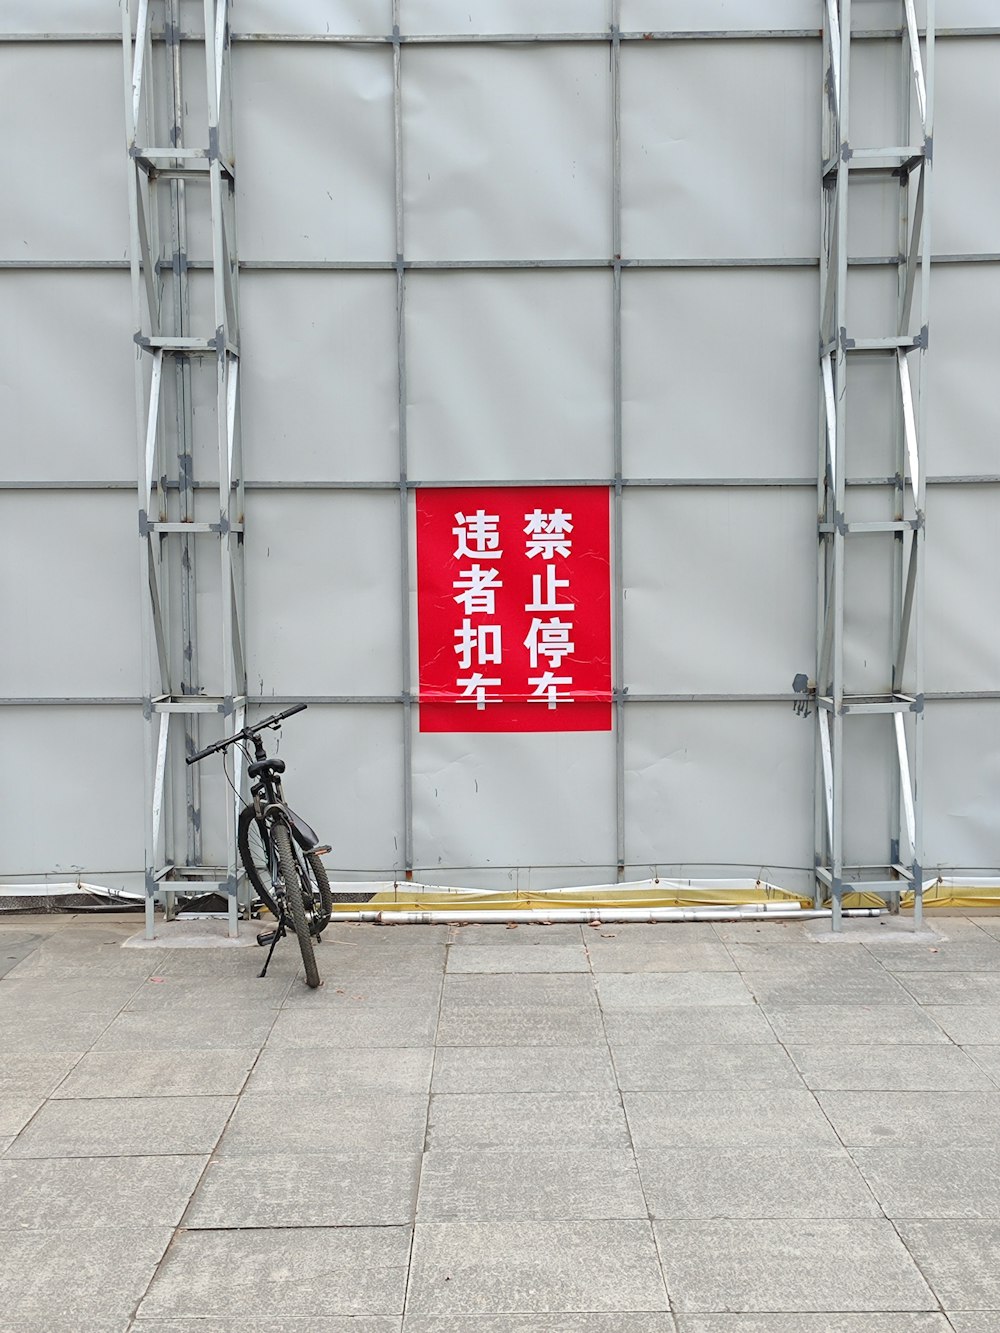 a bicycle parked in front of a building with a red sign